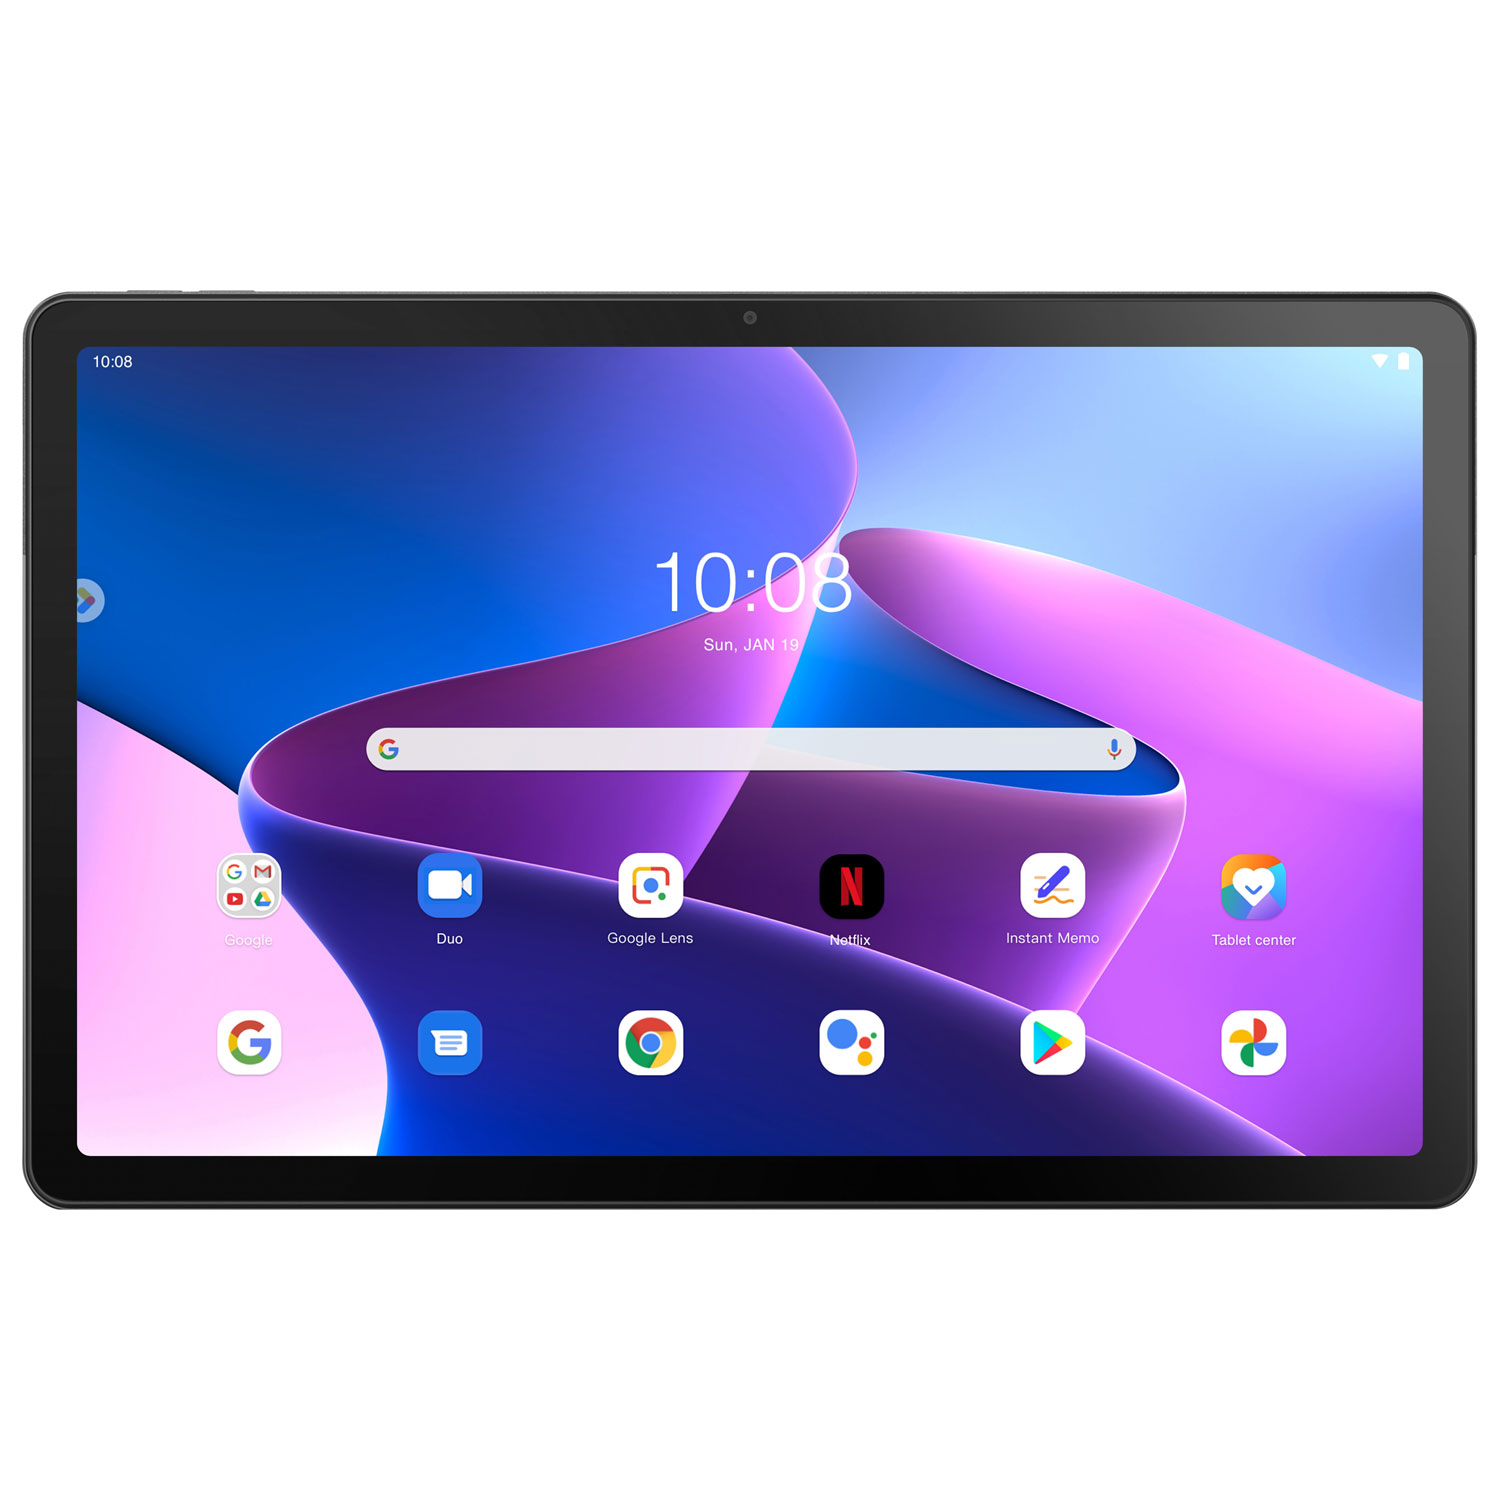 Lenovo Tab M10 10" 64GB Android 12 Tablet with MediaTek Helio G88 8-Core Processor w/ Case - Storm Grey - Only at Best Buy